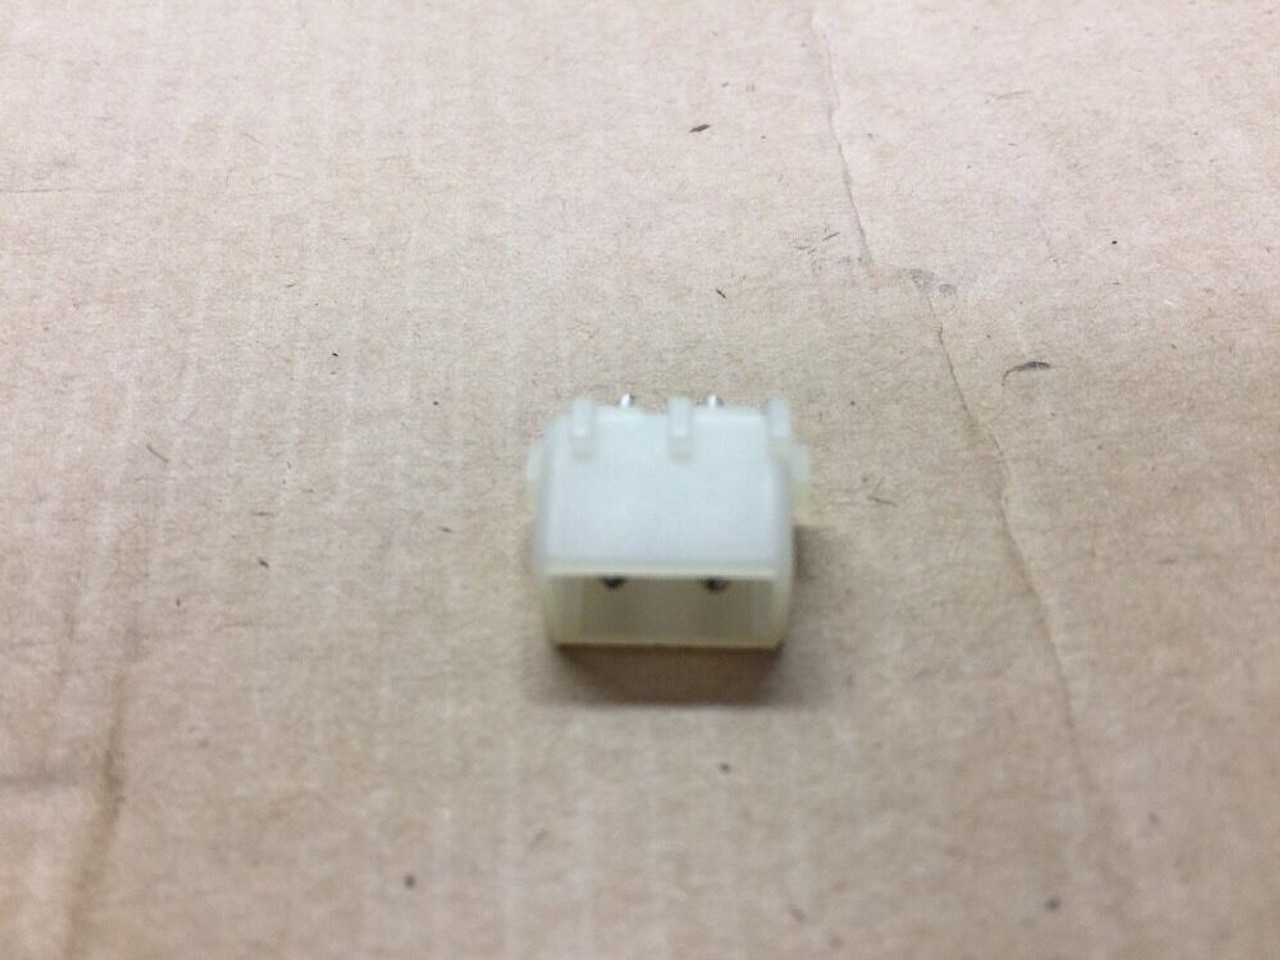 Electric Connector Plug 350209-1 Tyco Electronics ESS Lot of 17